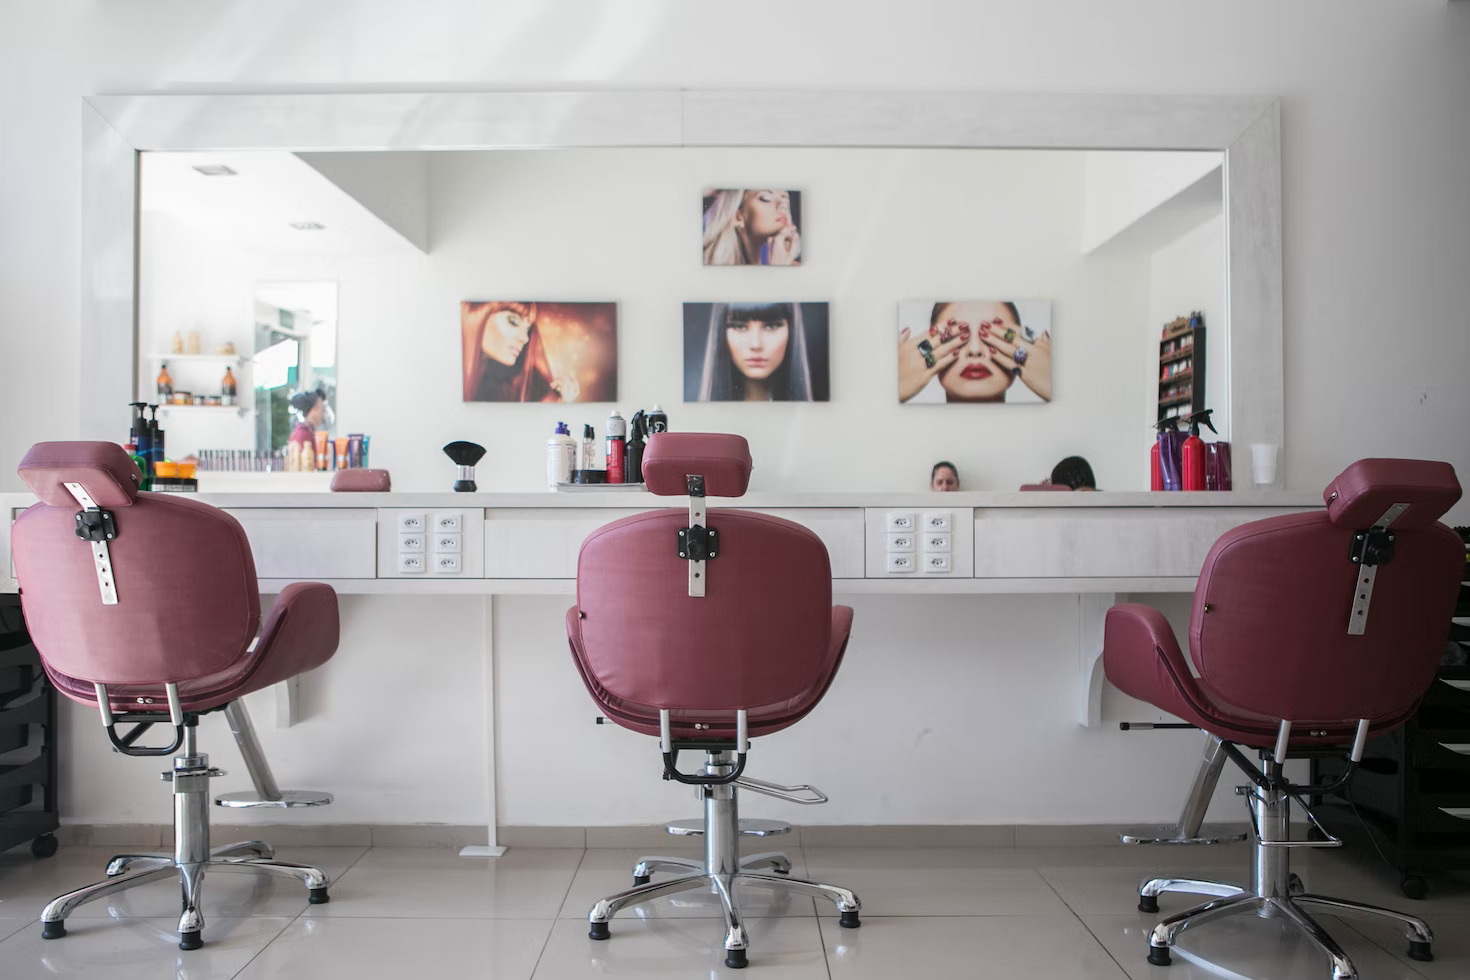 Hairstyling for Makeup Artists Why Is It Crucial (1) hairstyling for makeup artists - Hairstyling for Makeup Artists Why Is It Crucial 1 - Hairstyling for Makeup Artists- Why Is It Crucial?